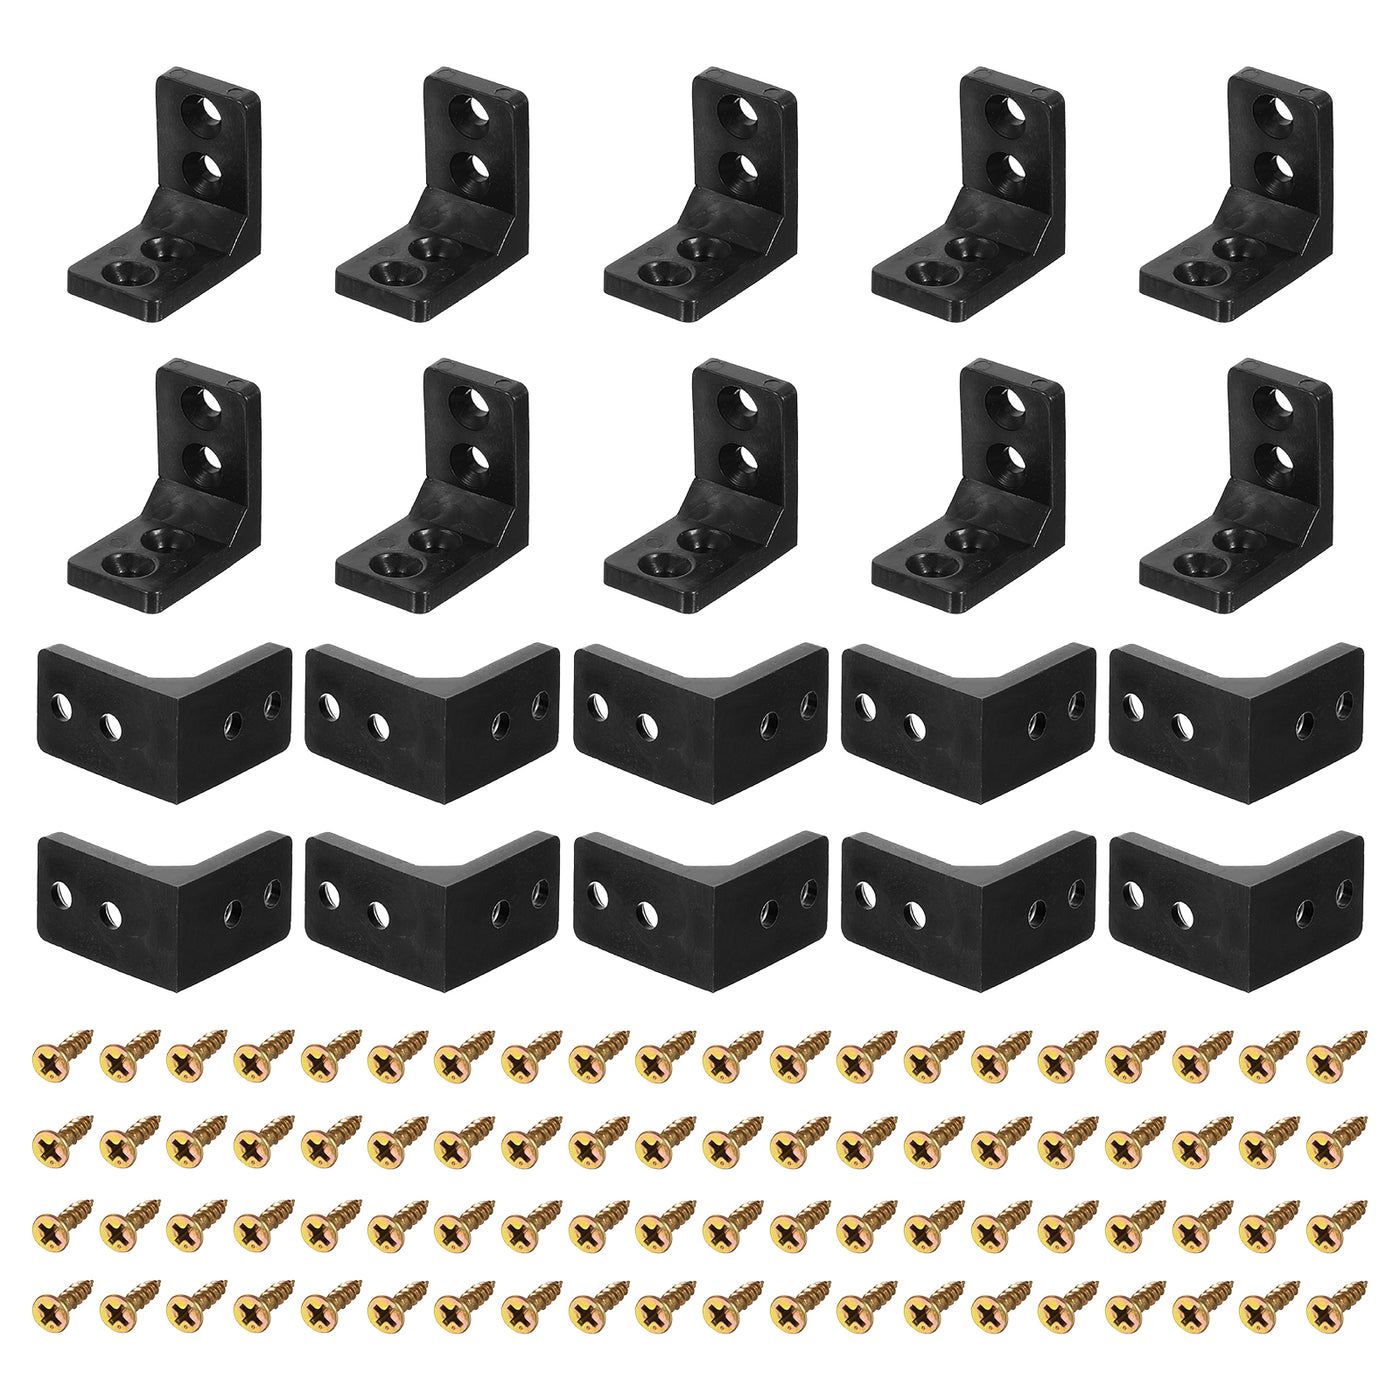 uxcell Uxcell 30Pcs 90 Degree Plastic Corner Braces, 16.5x27x27mm Nylon Shelf Right Angle Brackets with Screws for Cabinets, Cupboards (Black)